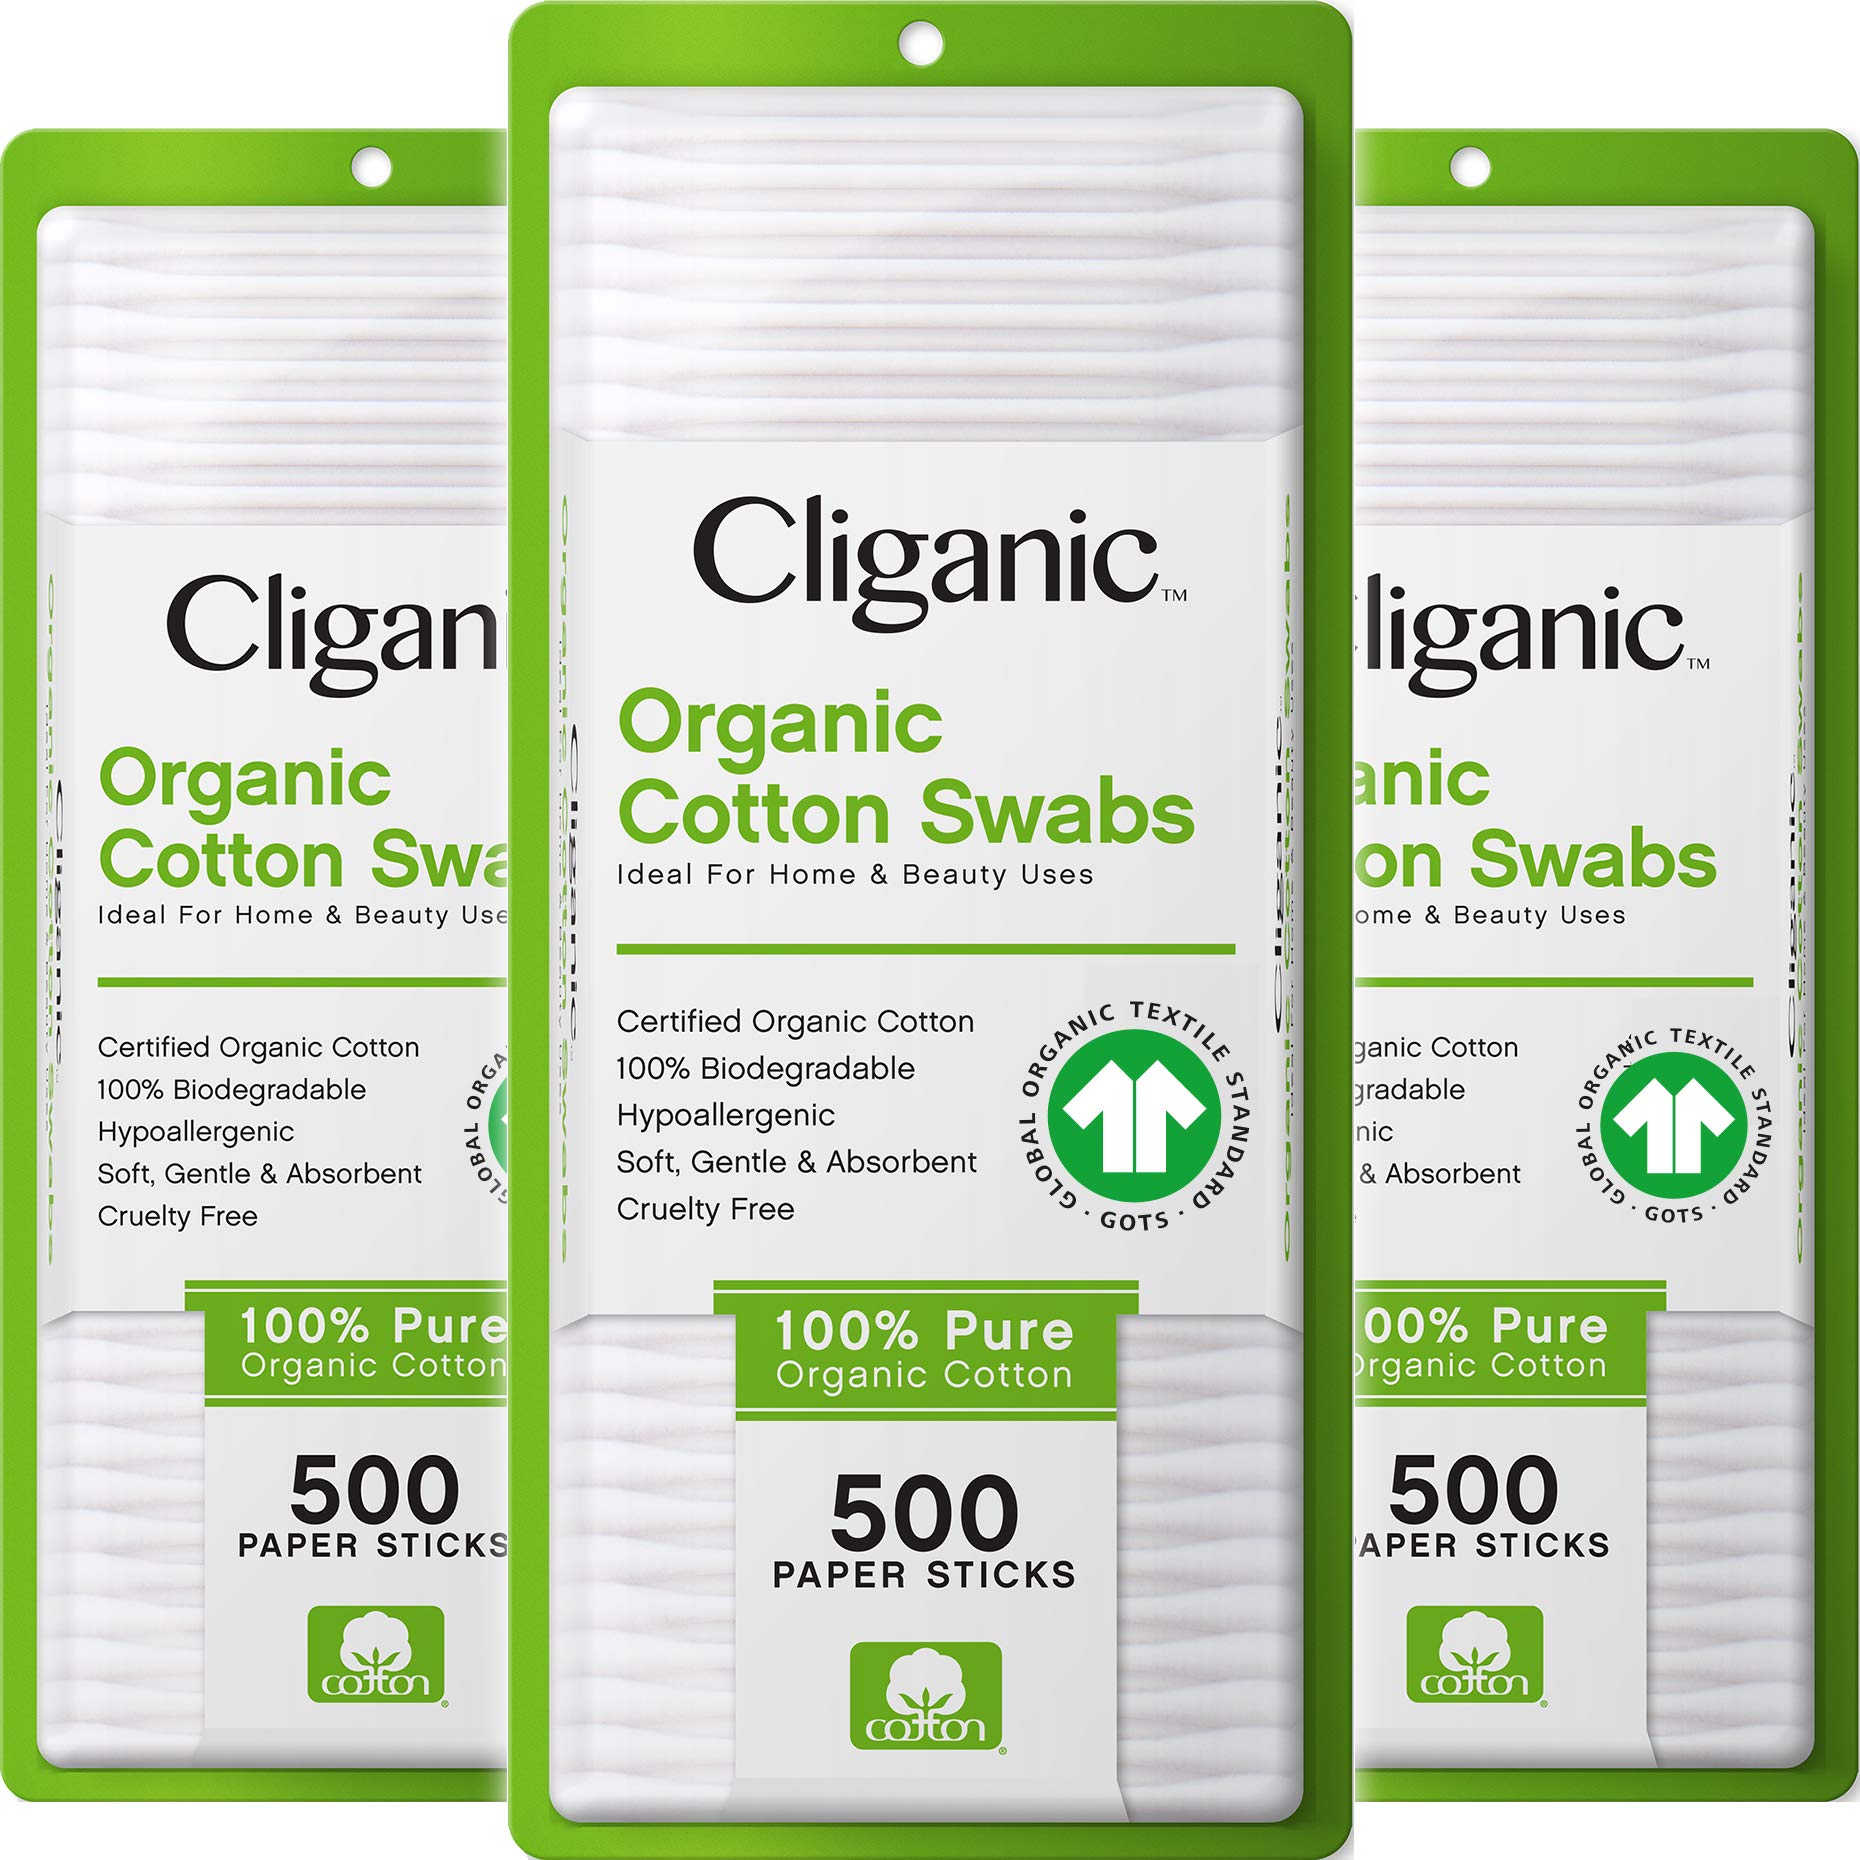 Cliganic Organic Cotton Swabs, 1500 Count - 100% Pure Natural Biodegradable Cotton, Chlorine-Free Hypoallergenic, Soft, Gentle & Absorbent Buds